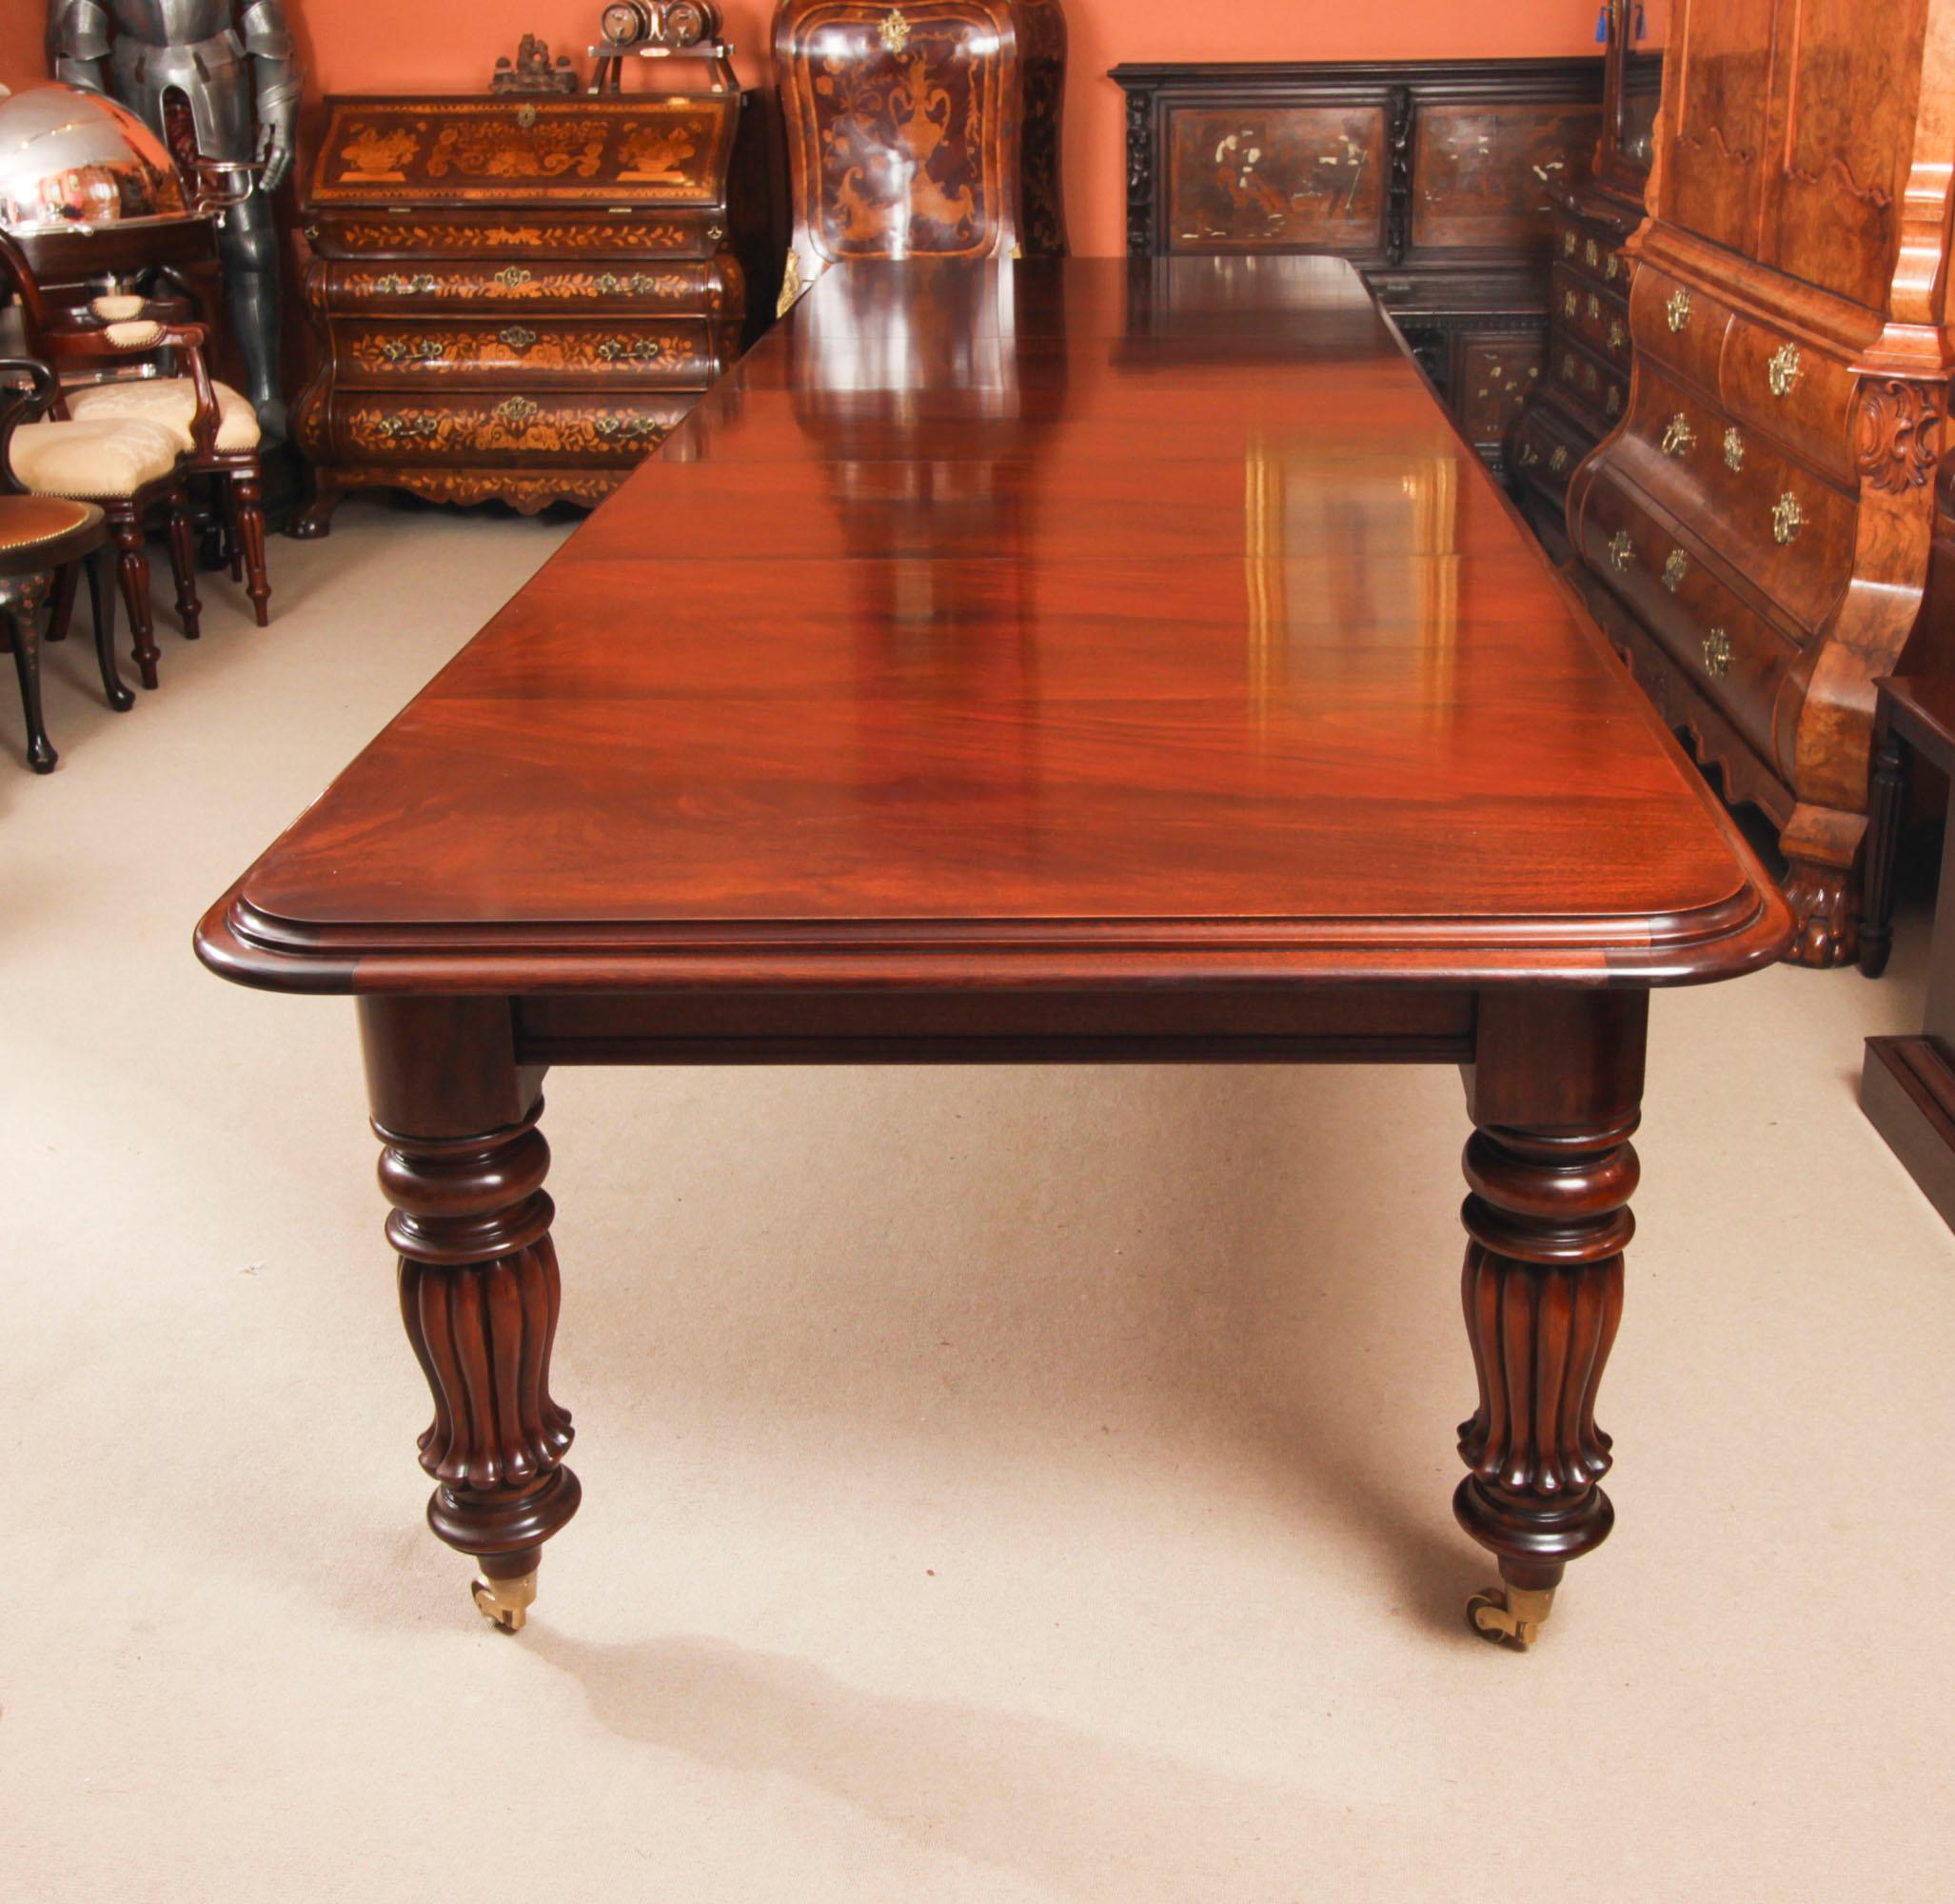 This is a beautiful large 14ft Vintage Victorian Revival flame mahogany extending dining table dating from the mid 20th Century.

This amazing table can seat sixteen people in comfort and has been hand-crafted from beautiful solid flame mahogany.